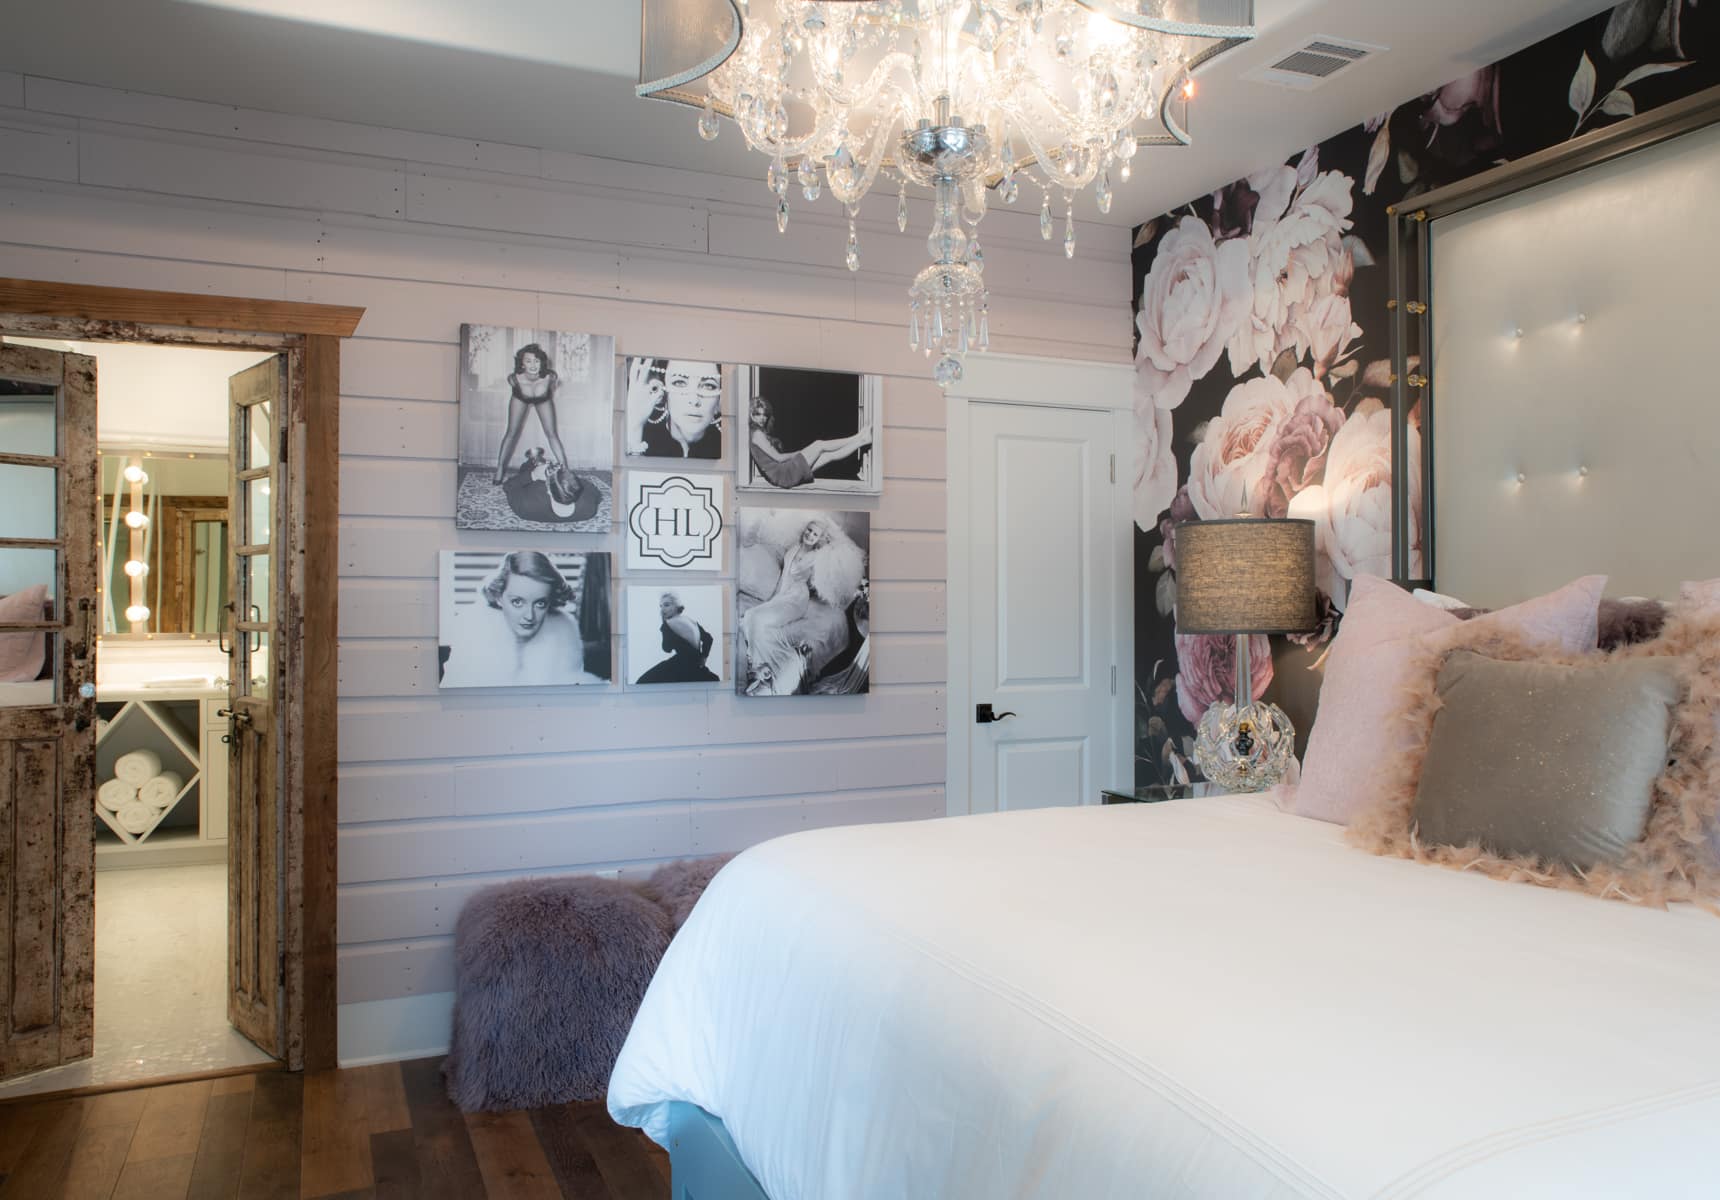 King bed in a room with floral decorative wall paper a chandelier and a wooden double door to a bathroom